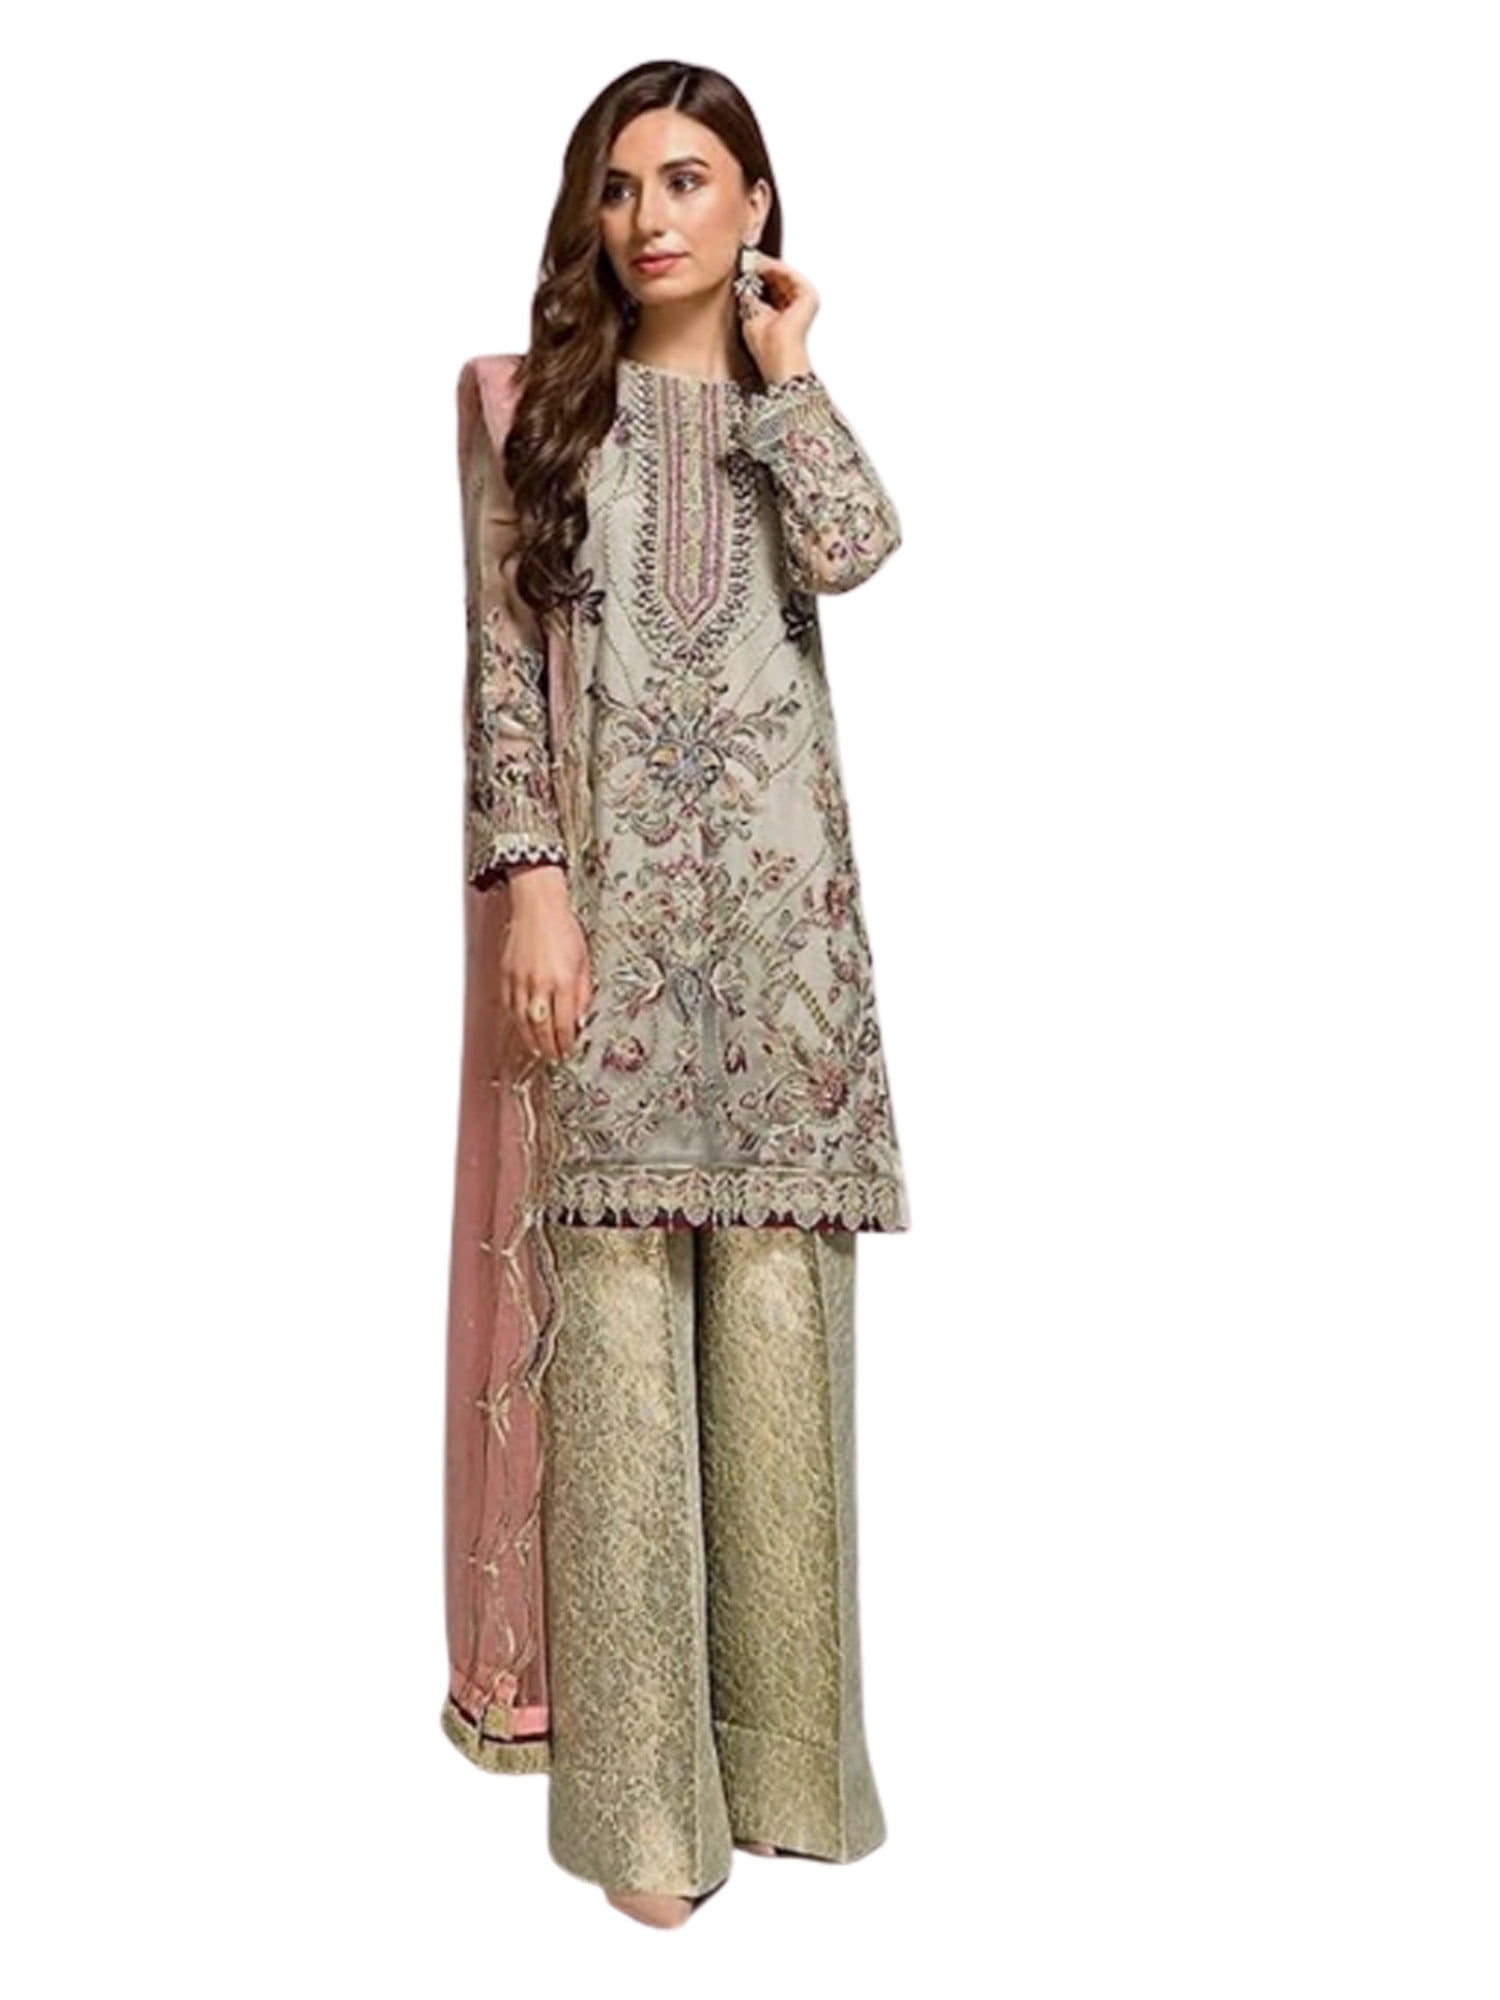 Latest Indian Fashion Kurti Designs Paired with jeans or pants. | Designer  party wear dresses, Party wear dresses, Indian designer wear